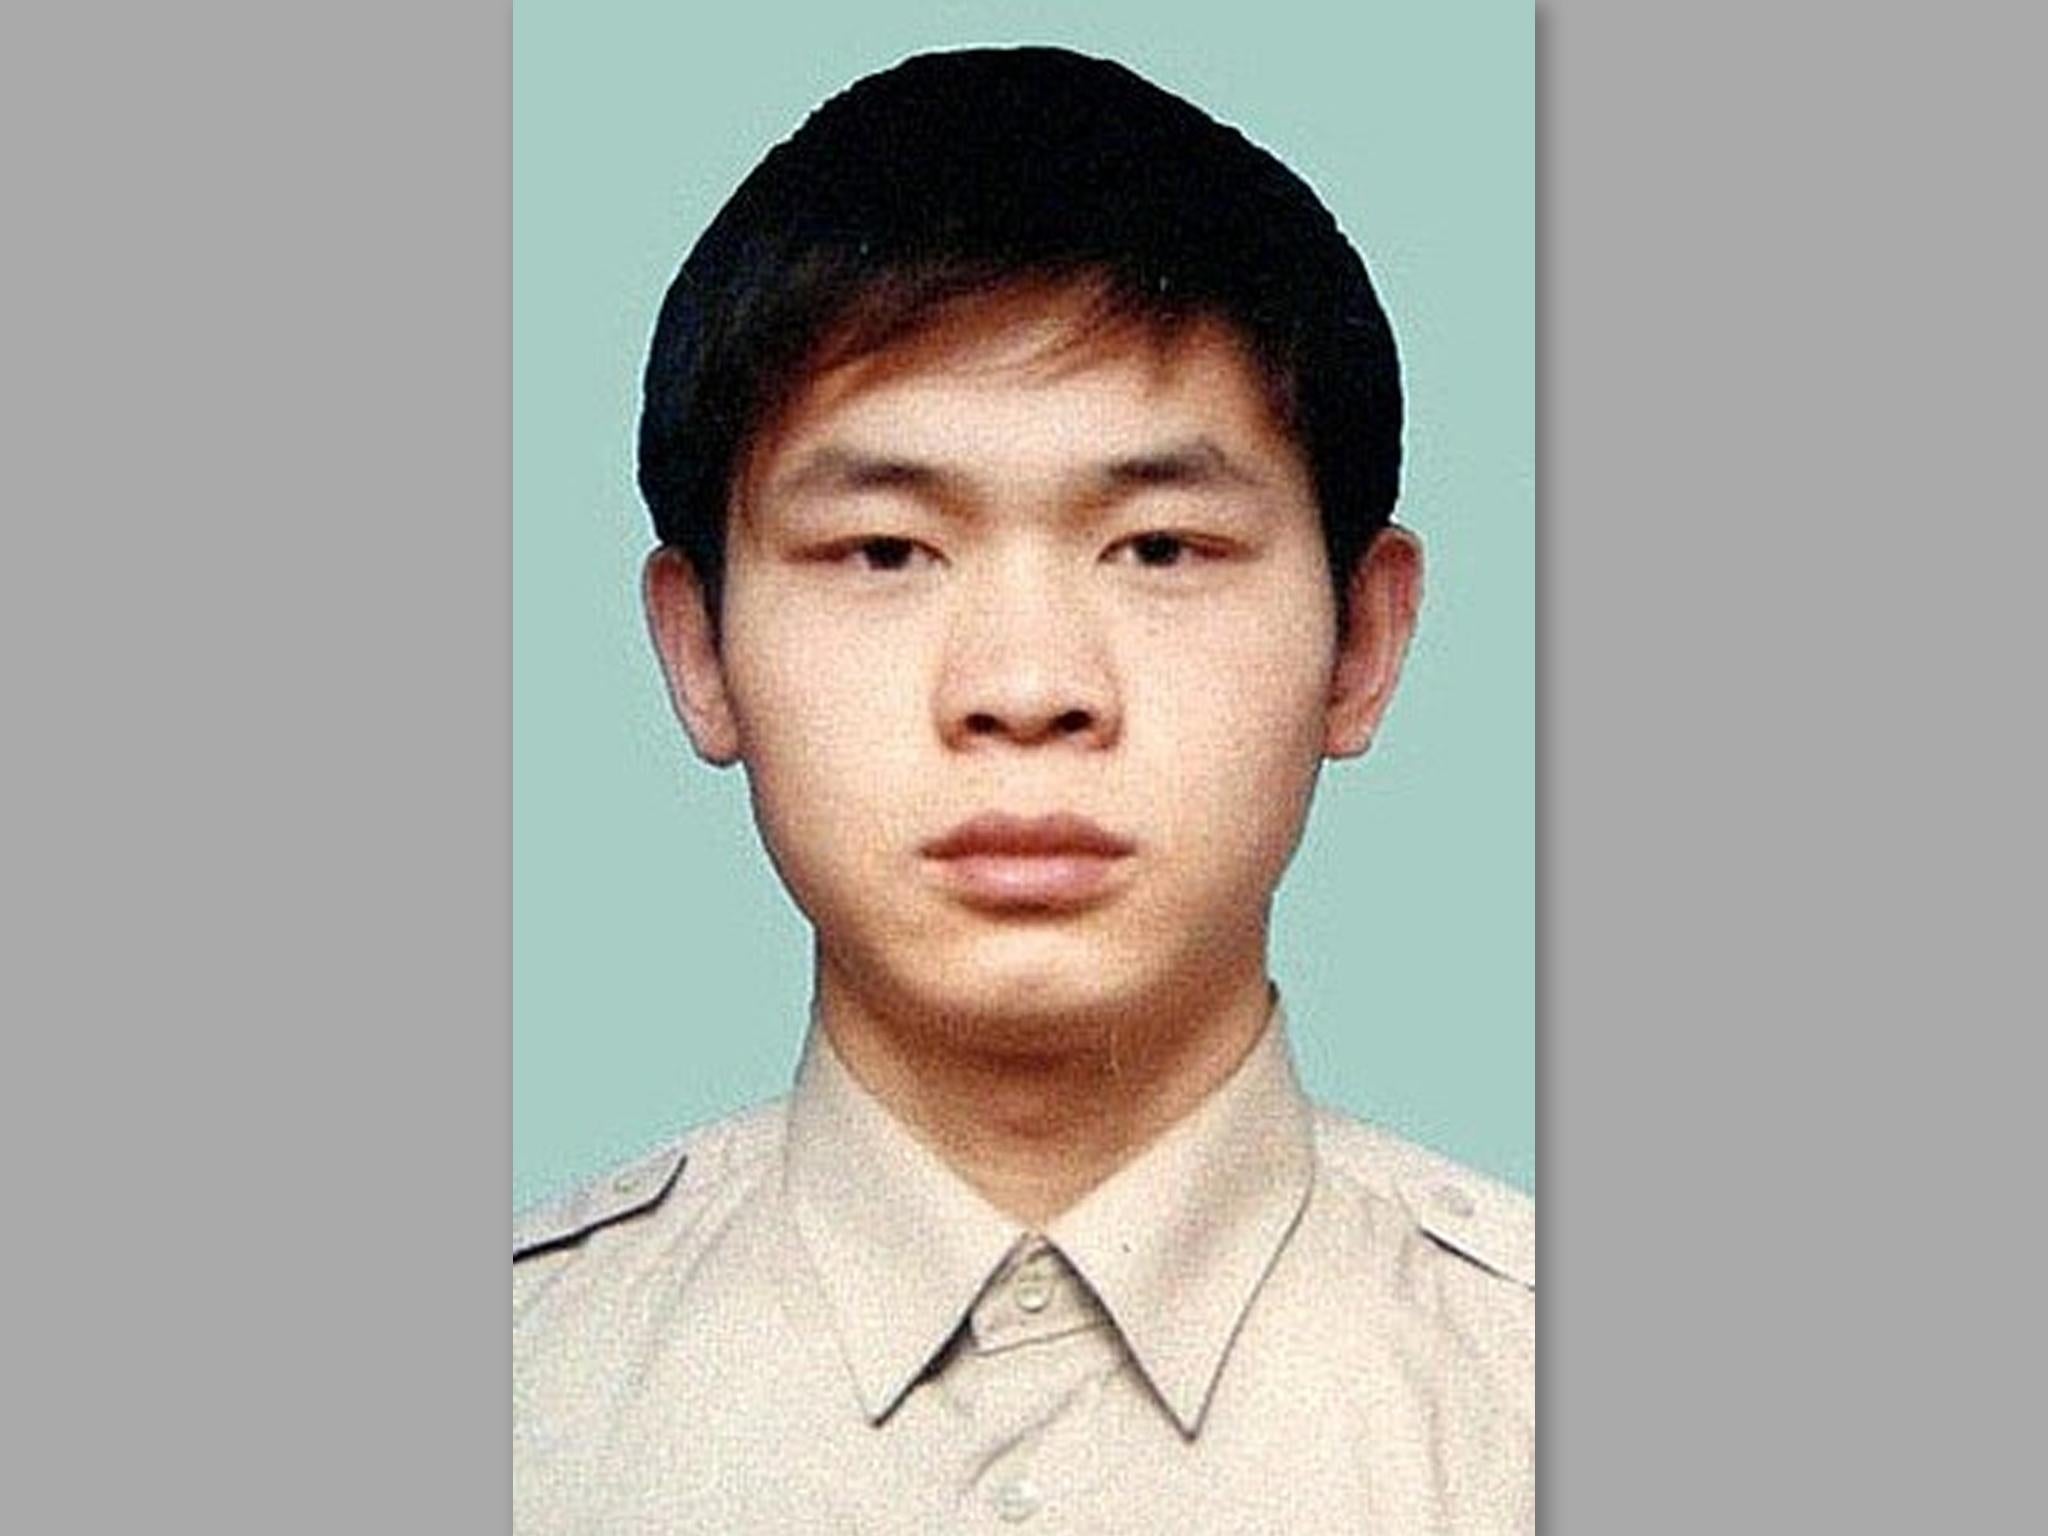 Wei Wei was executed by hanging after over 16 years on death row